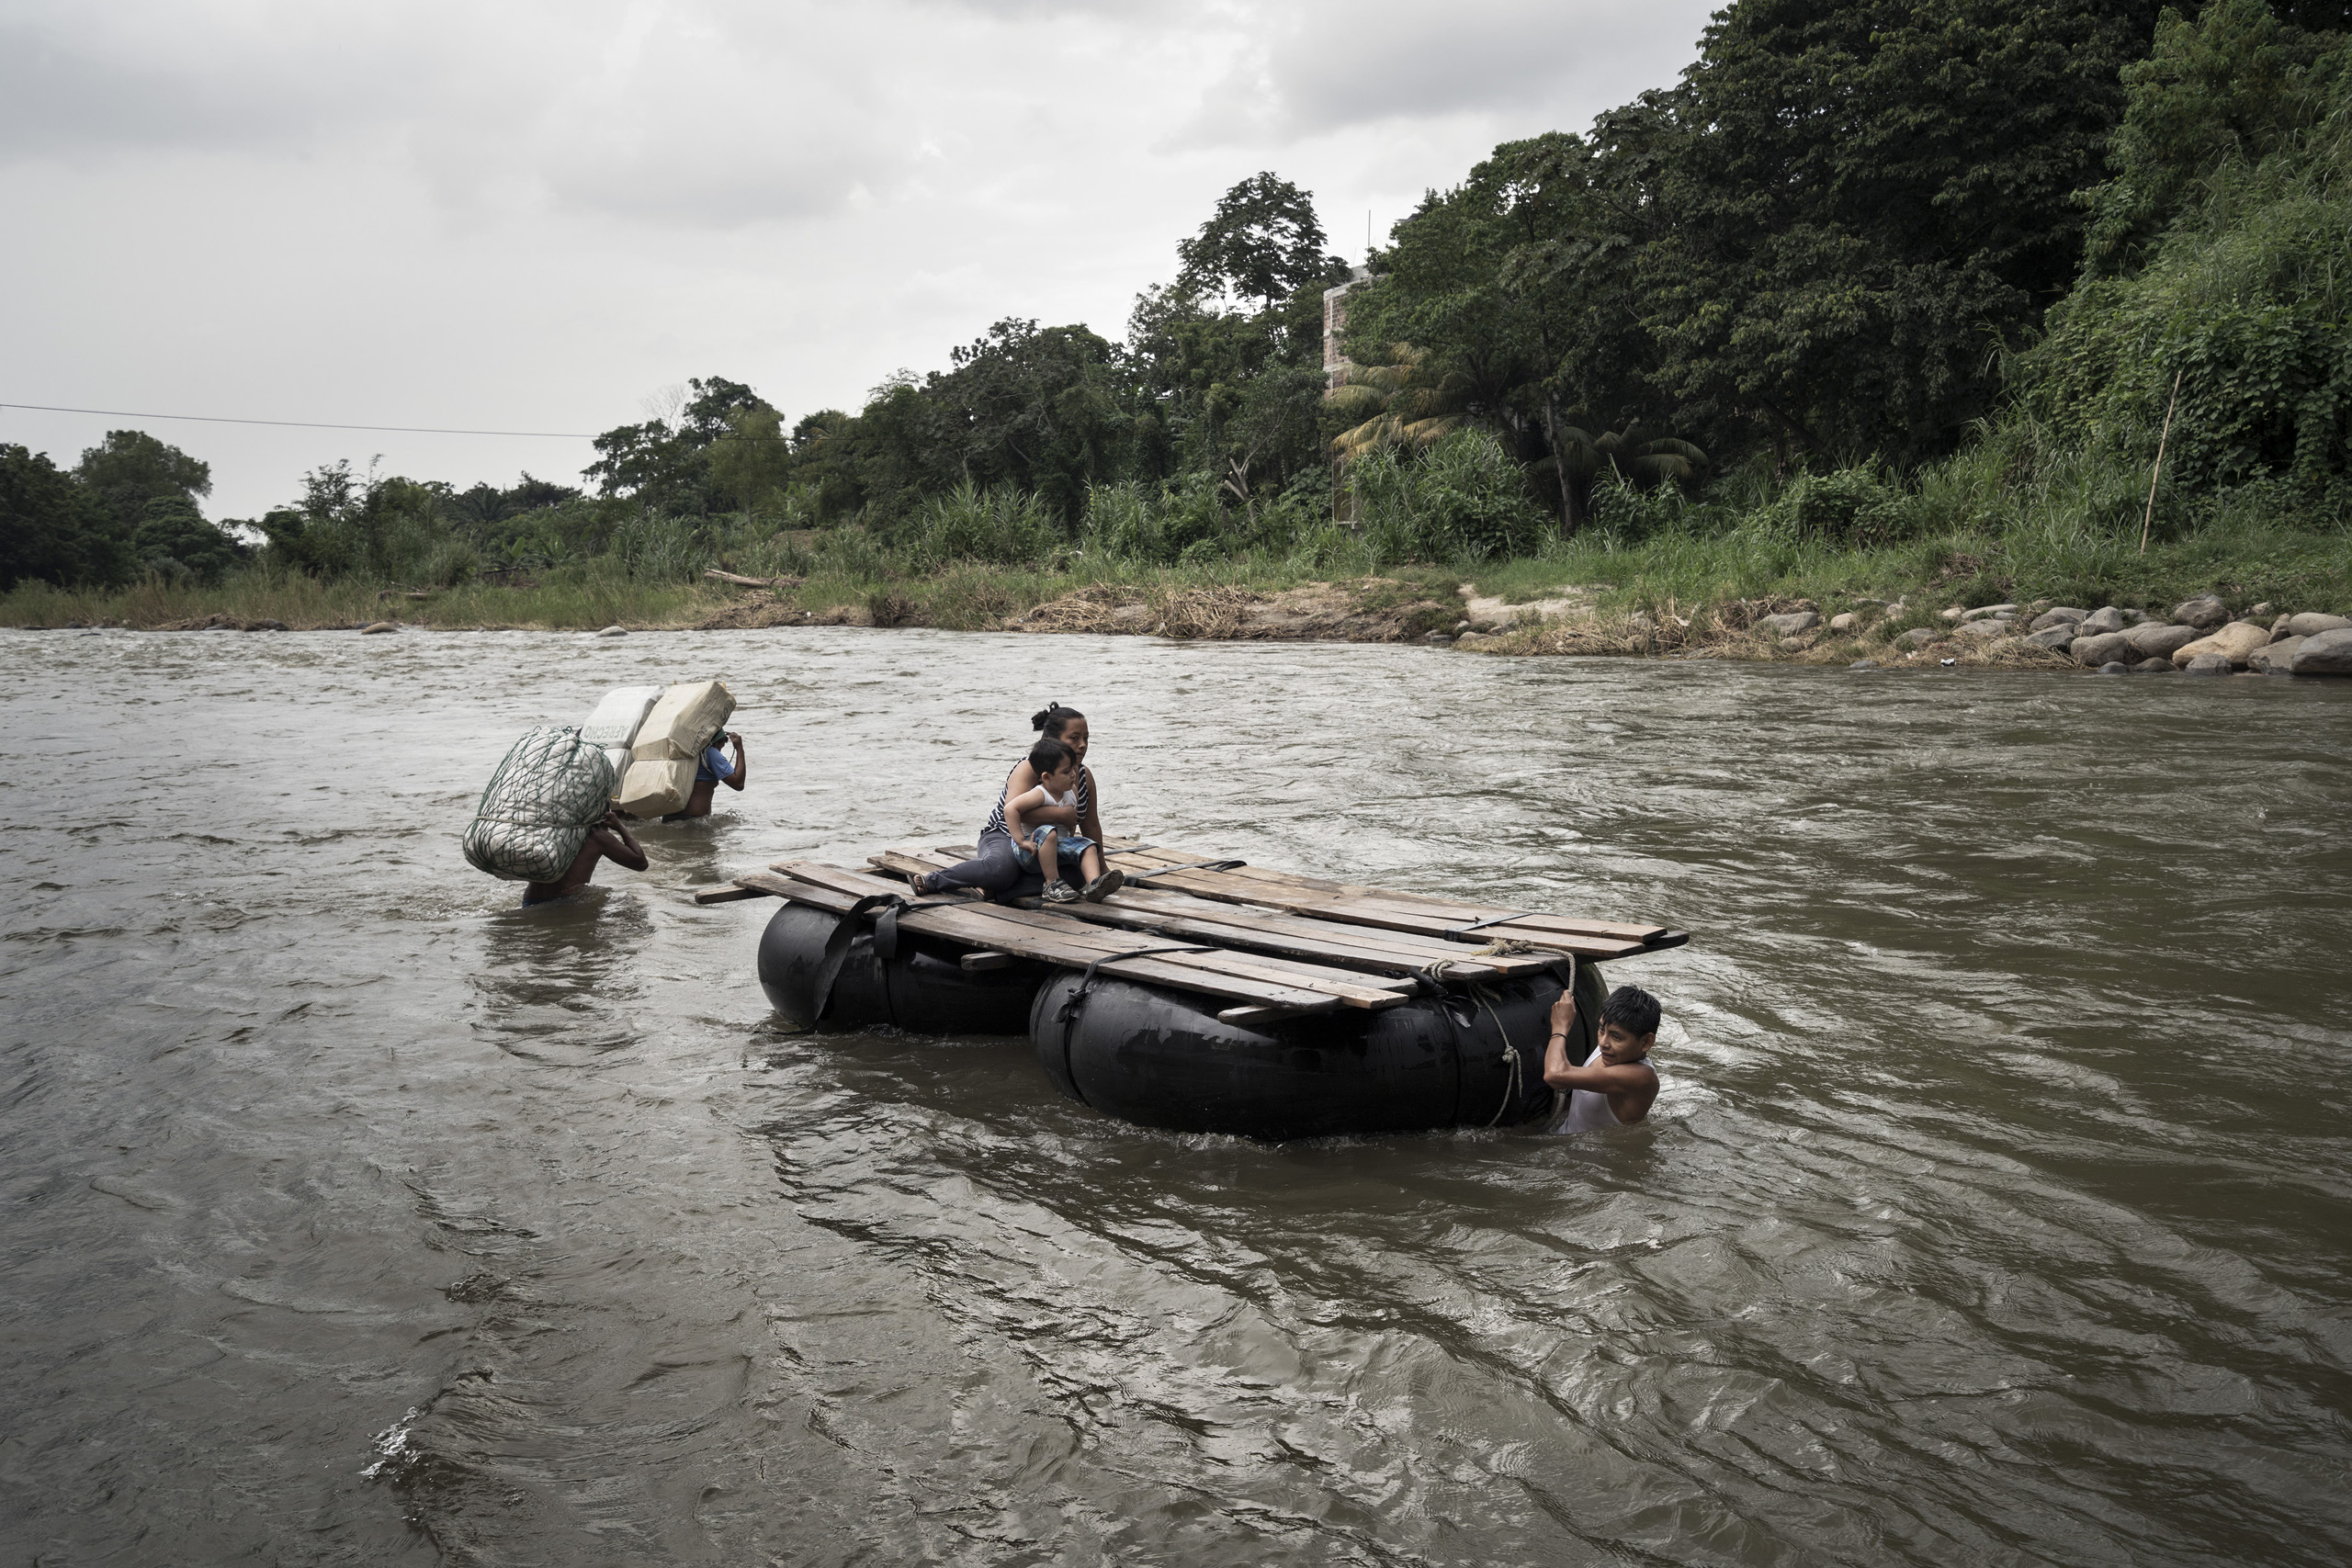 In the surrounding of the town of Talismàn, two smugglers and a mother with her son are illegally crossing the Rio Suchiate. The smugglers are going to Mexico while the mother with her son are going back to Guatemala, it is normal here to cross the border only to go shopping in Mexico. Guatemala. Sept. 21, 2016.